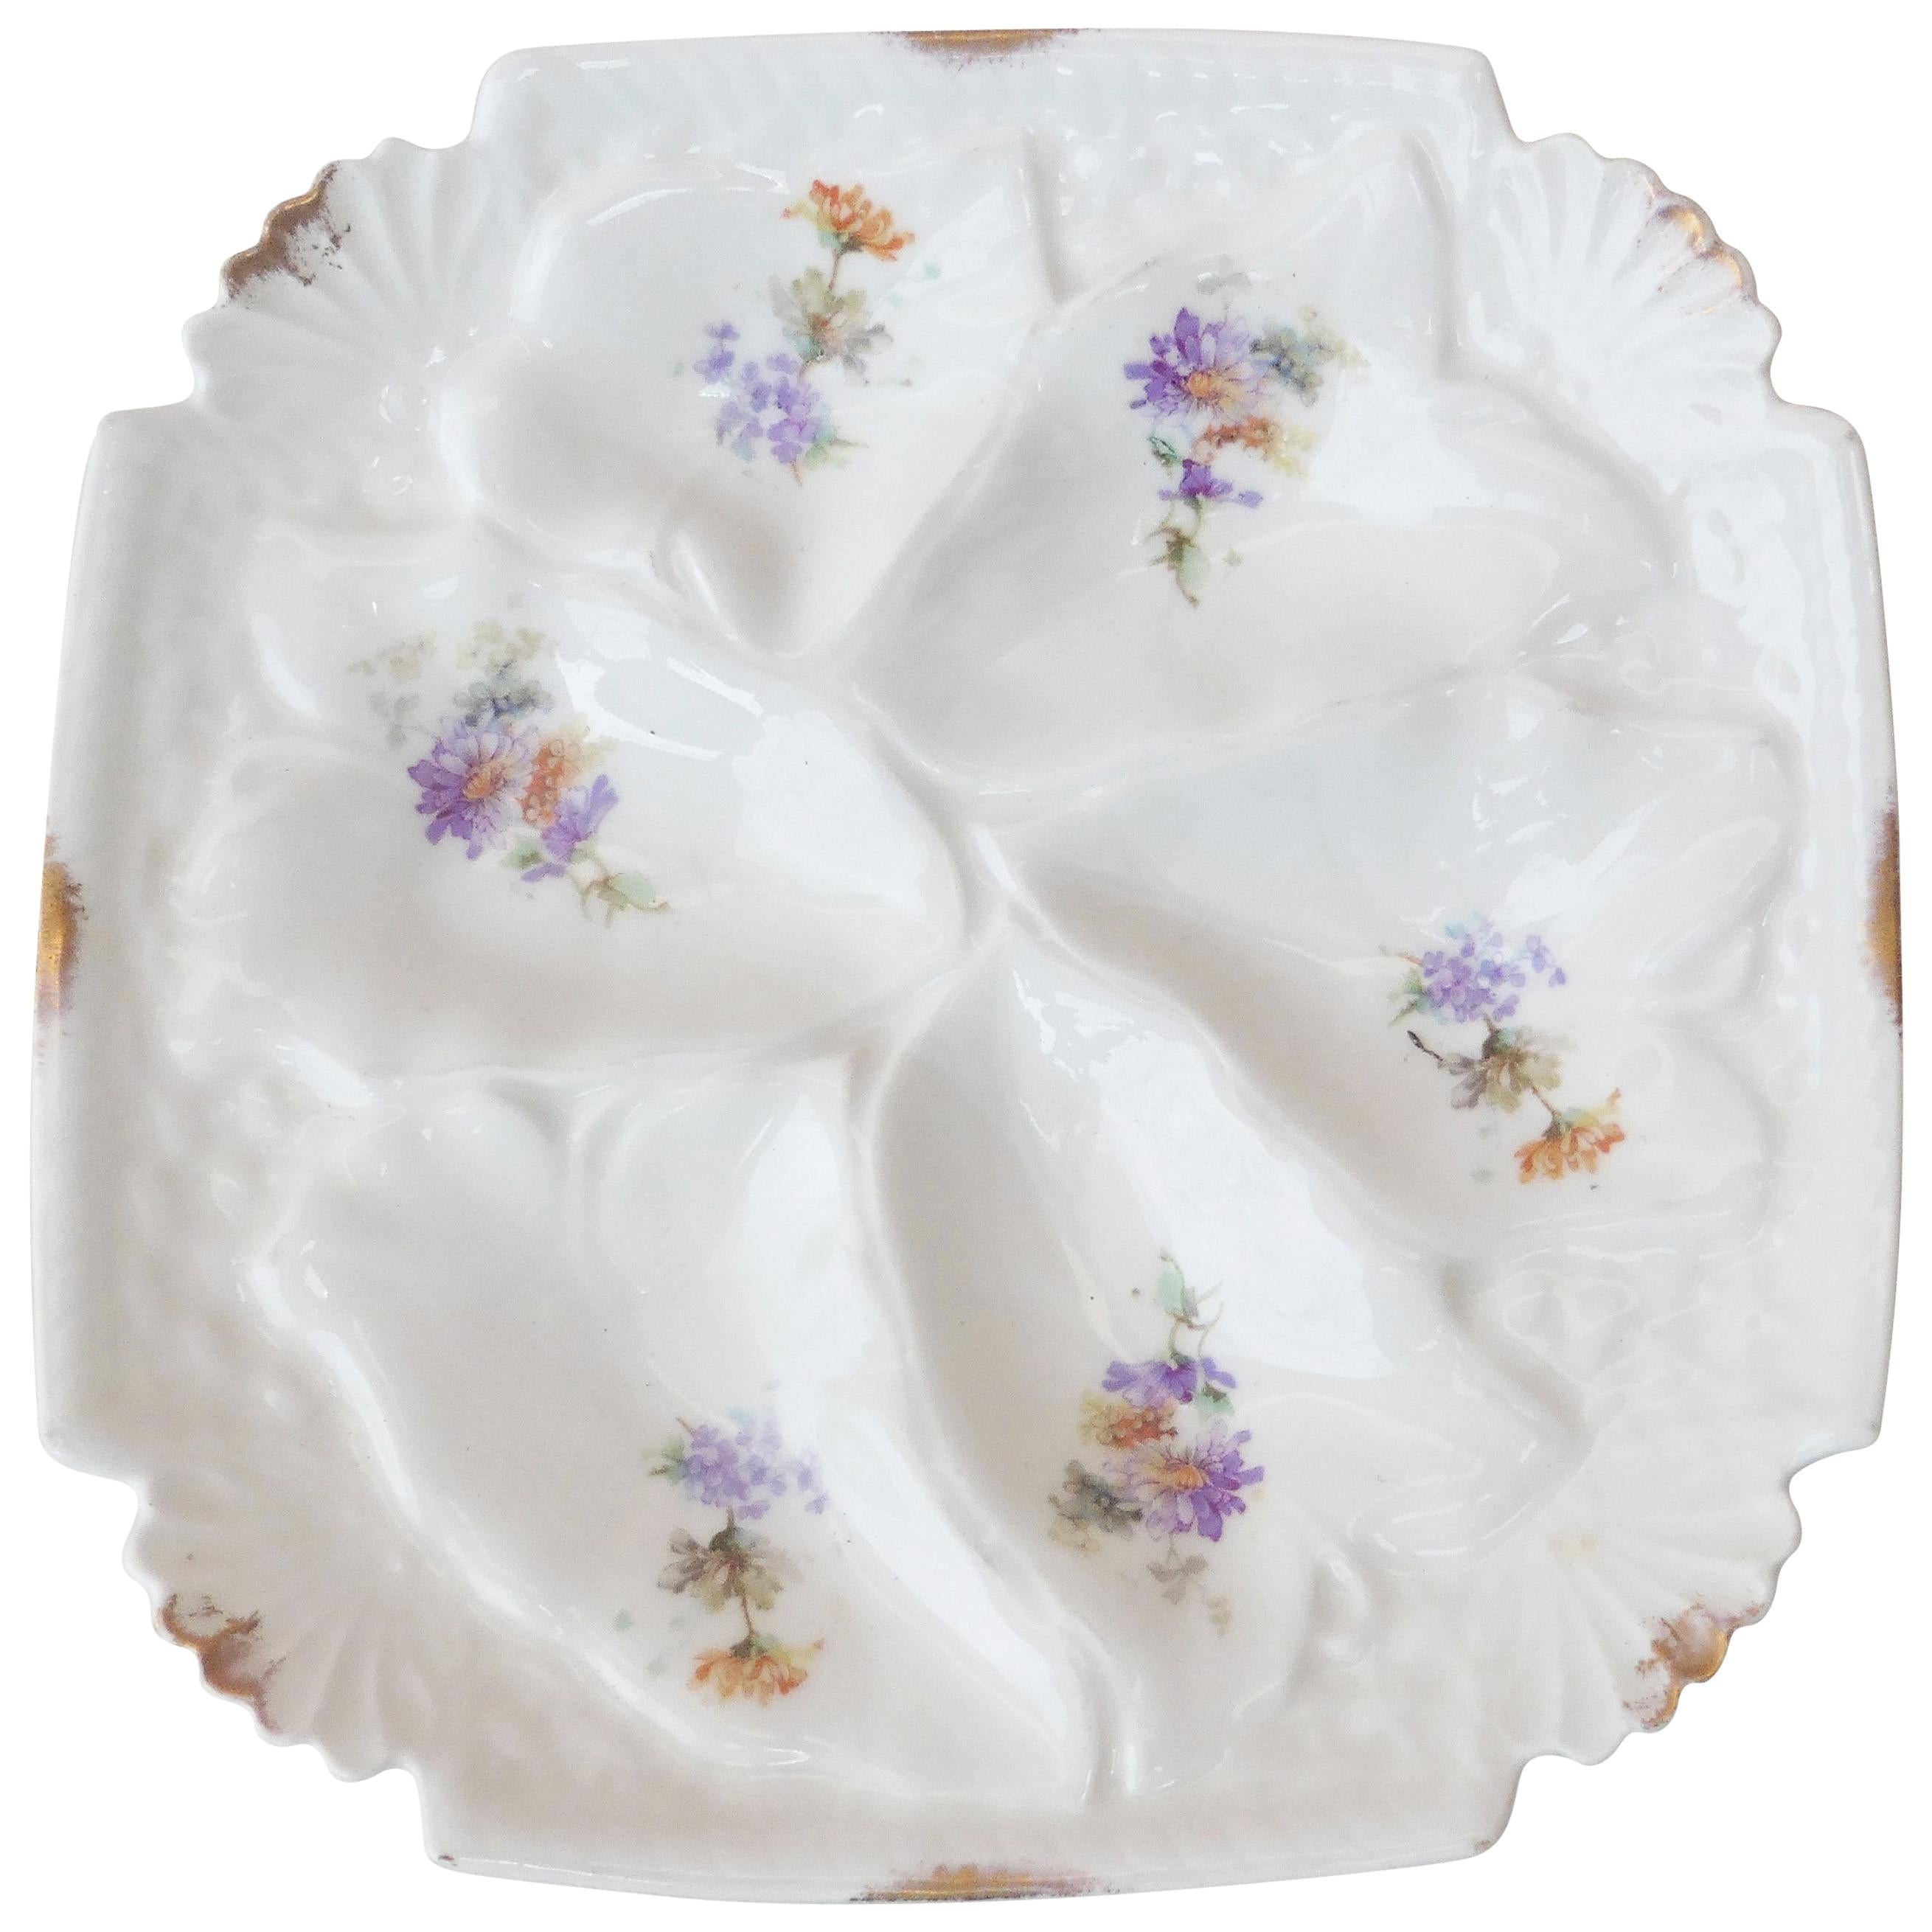 Square Porcelain Oyster Plate, circa 1900